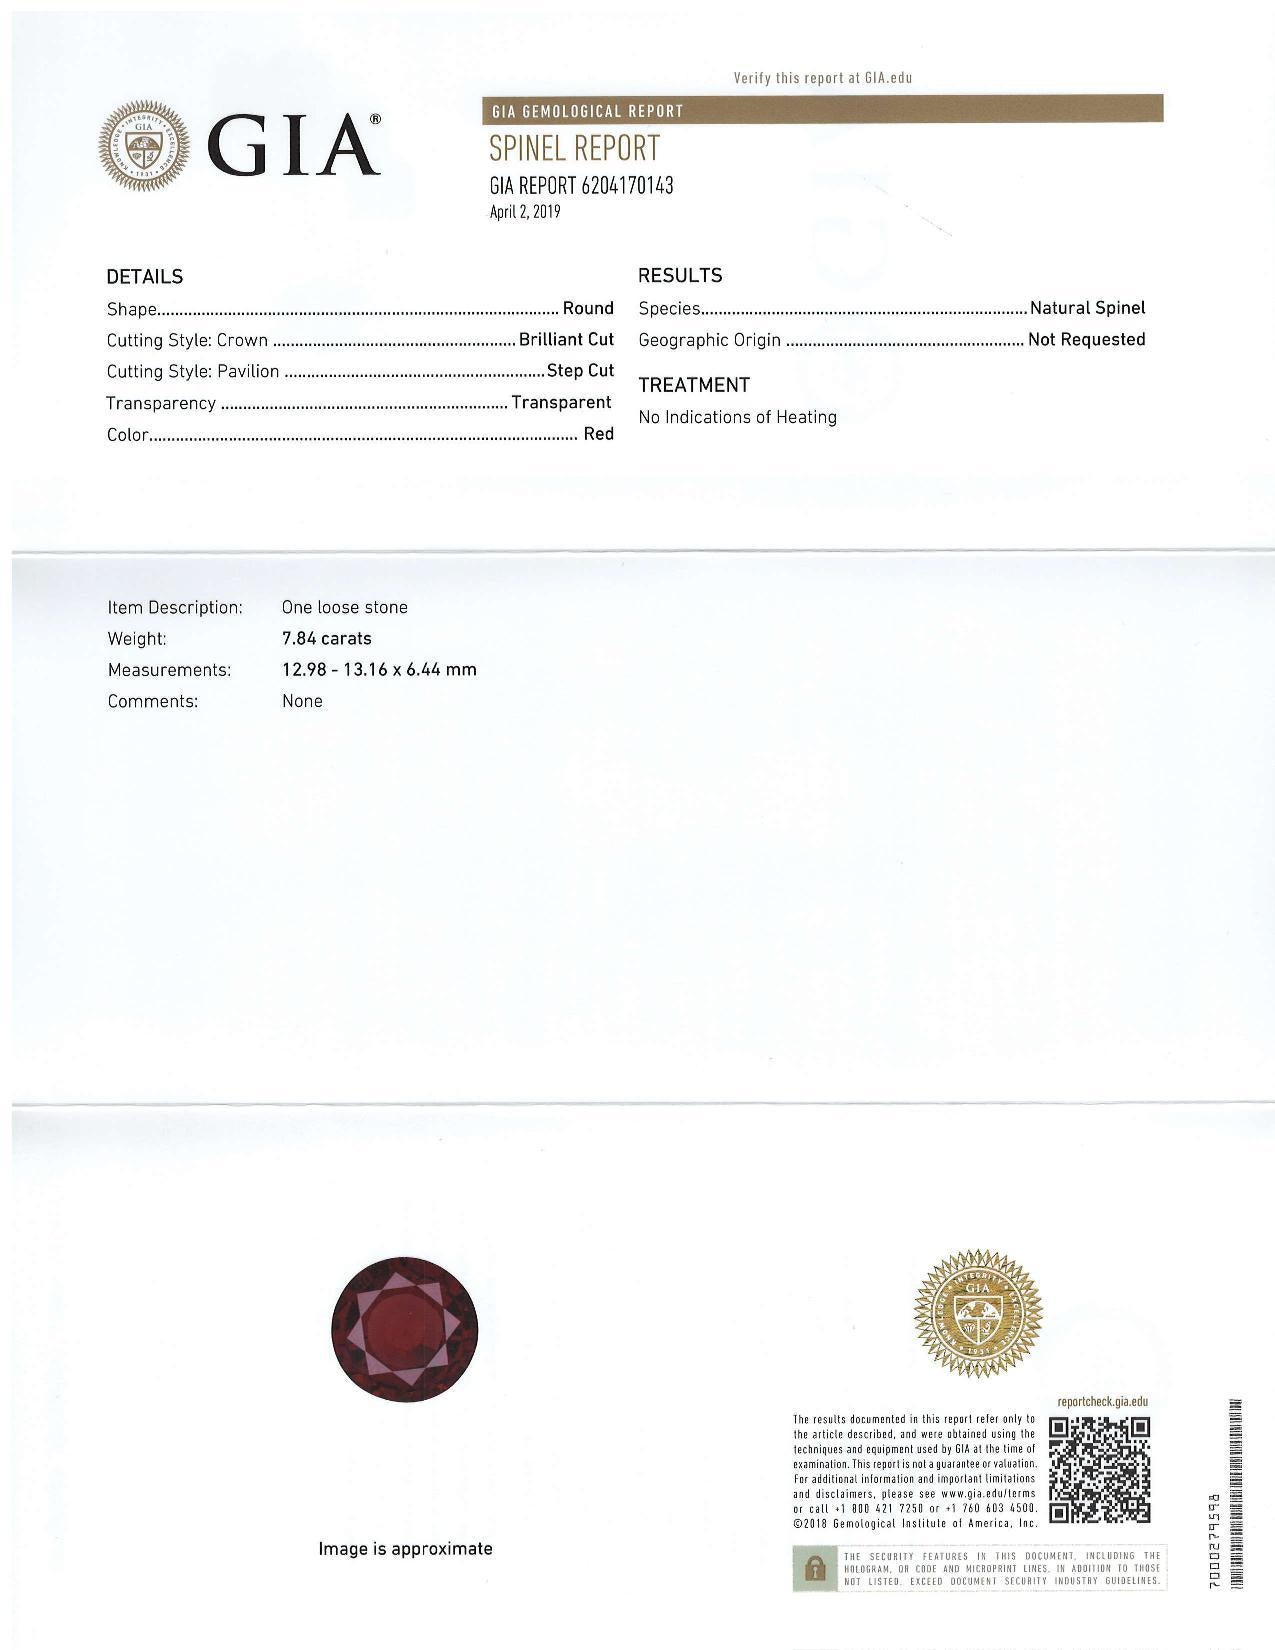 This unusually large, richly colored red spinel weighs 7.84 carats and is accompanied by Gemological Institute of America Report #6204170143 stating that it is unheated. Measuring 12.98 x 13.16 x 6.44 millimeters, it is a near perfect round which is